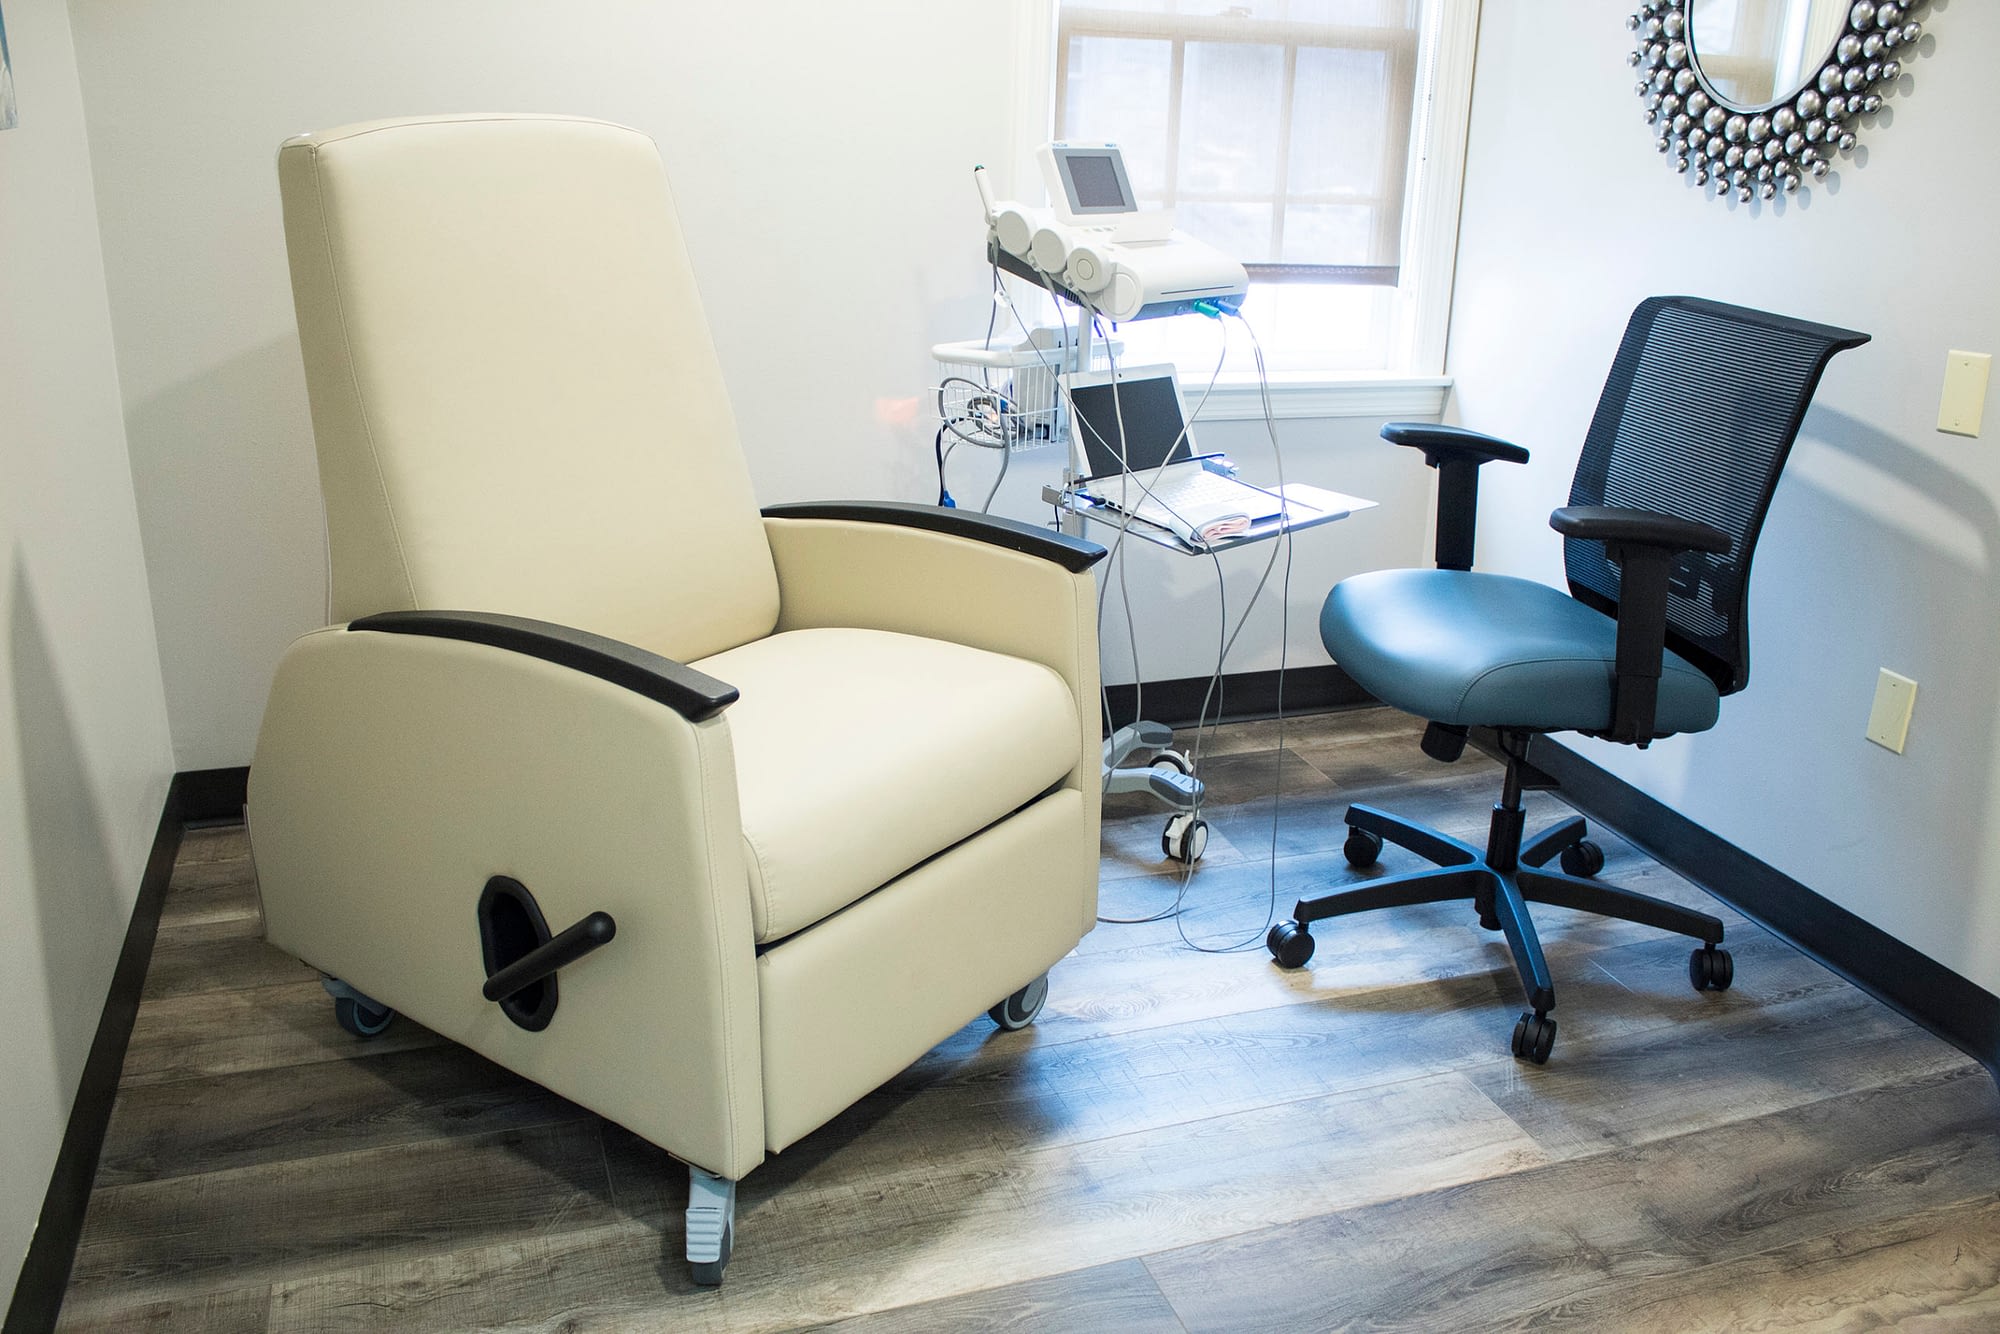 Recliner and Chair in Ultrasound Room